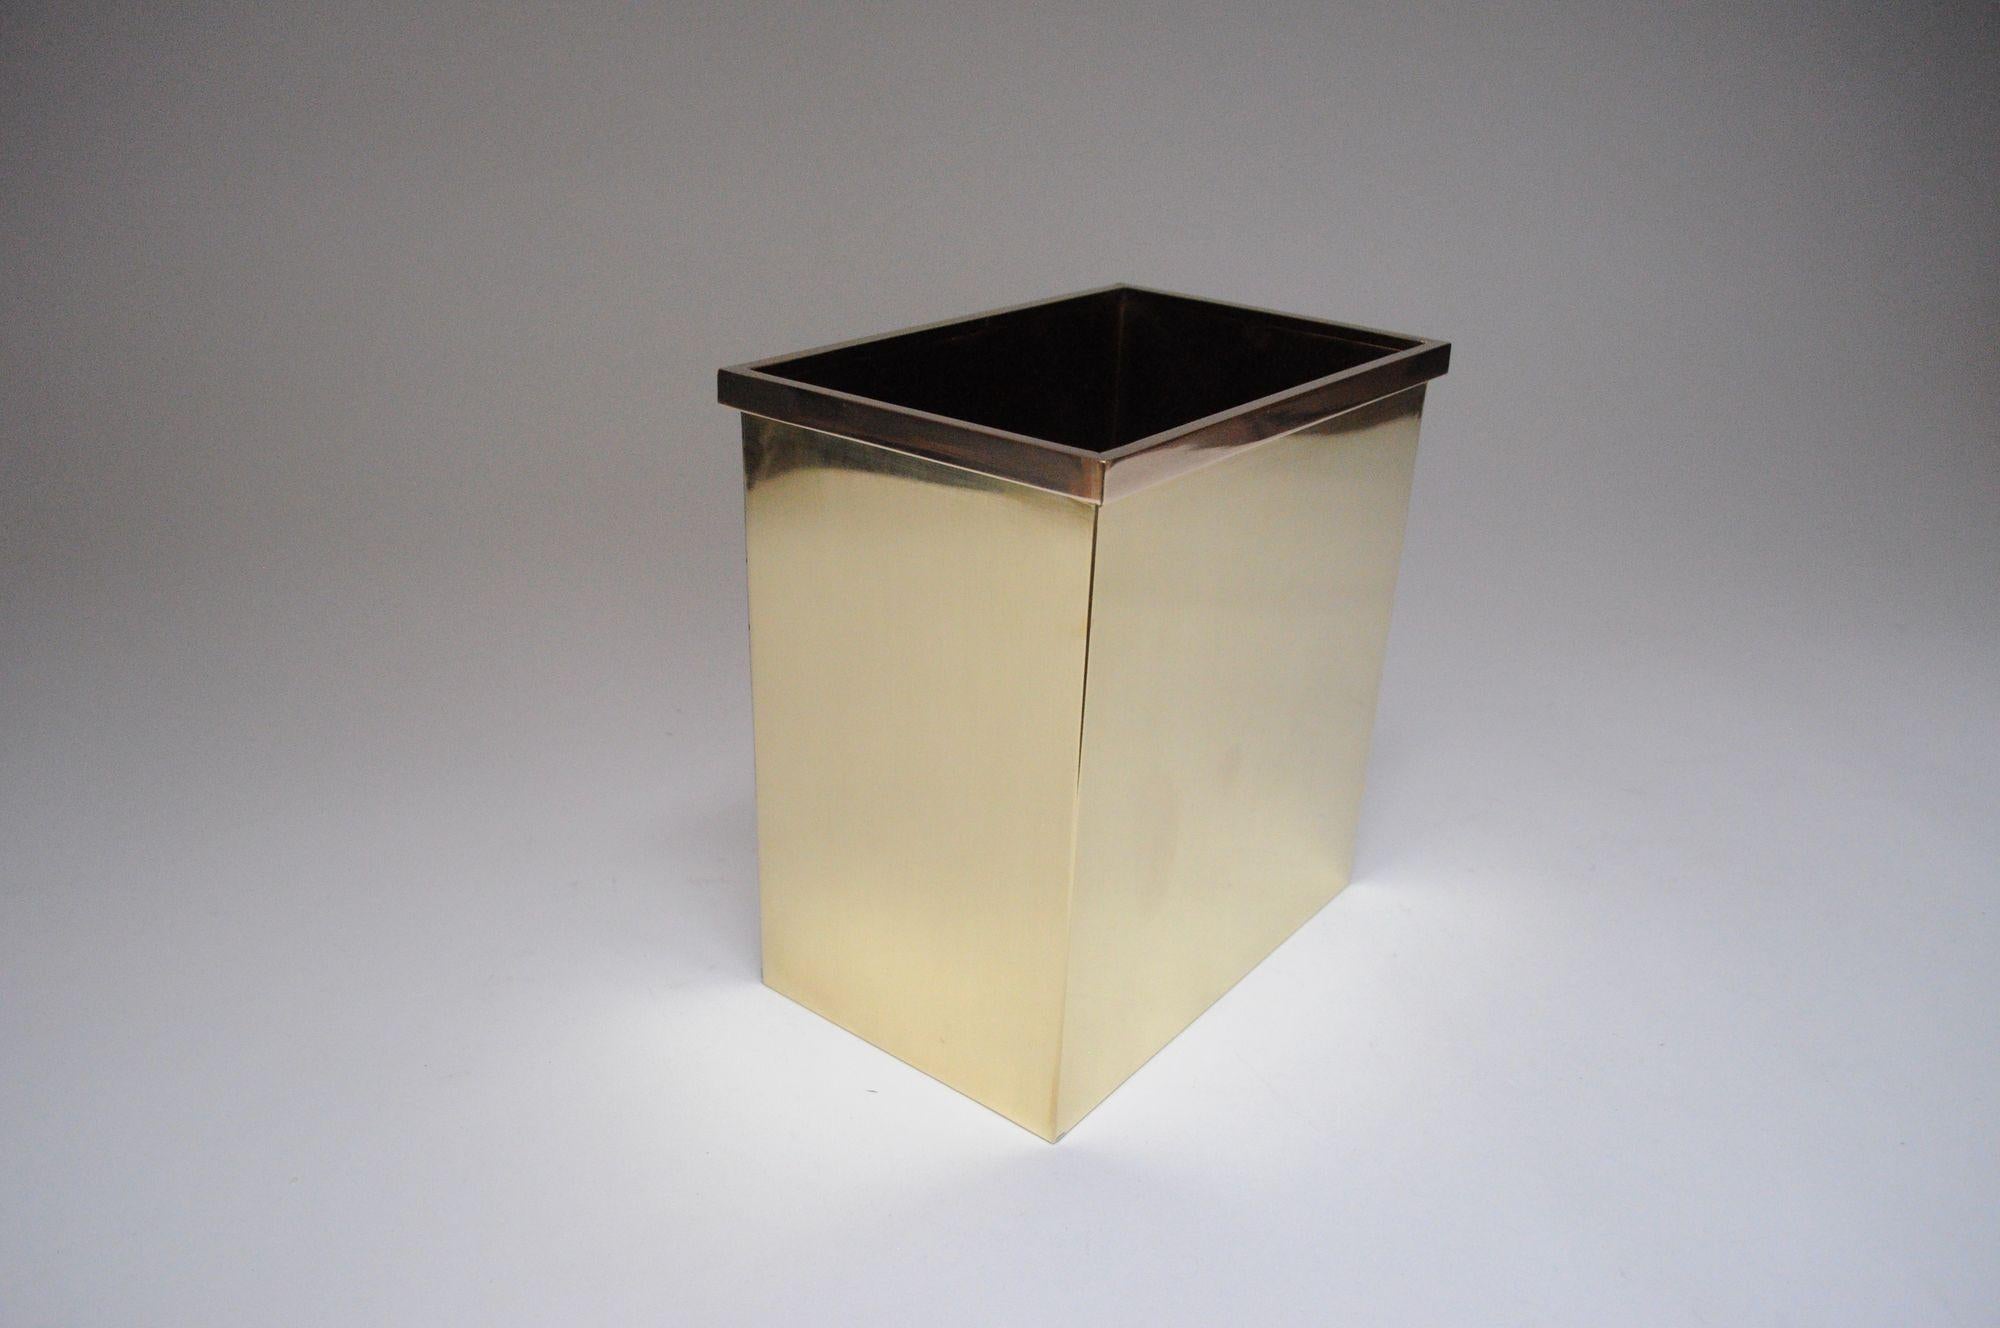 Late 20th Century Vintage Hollywood Regency Style Polished Brass Wastebasket/Umbrella Stand For Sale